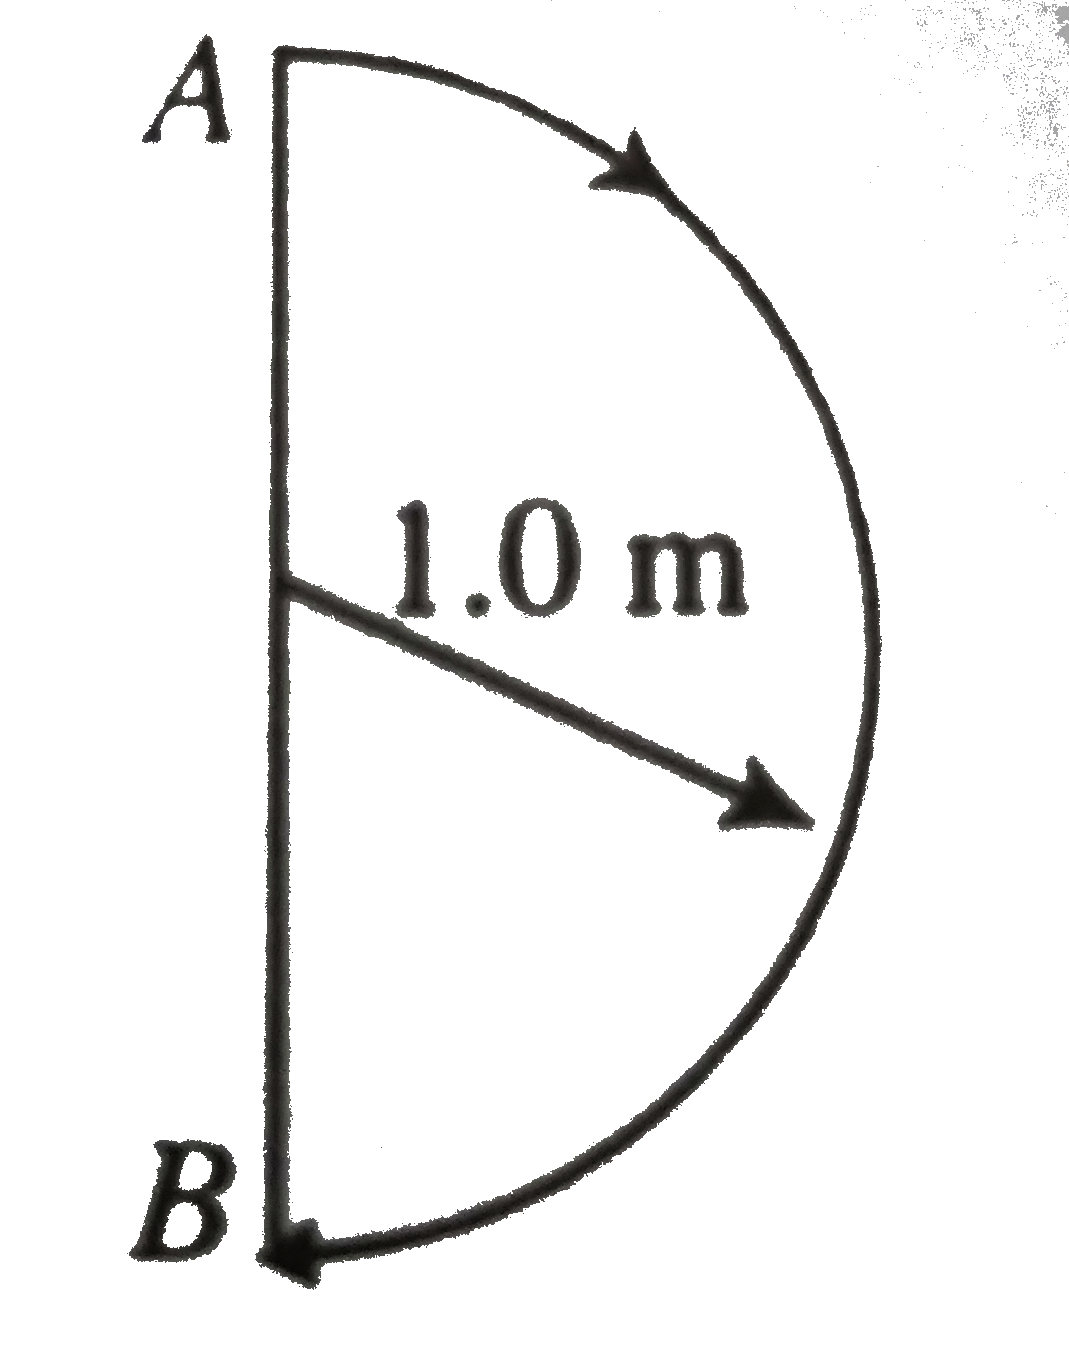 In 1.0 s, a particles goes from point A to point B, moving in a semicircle of radius 1.0 m figure. The magnitude of the average velocity is